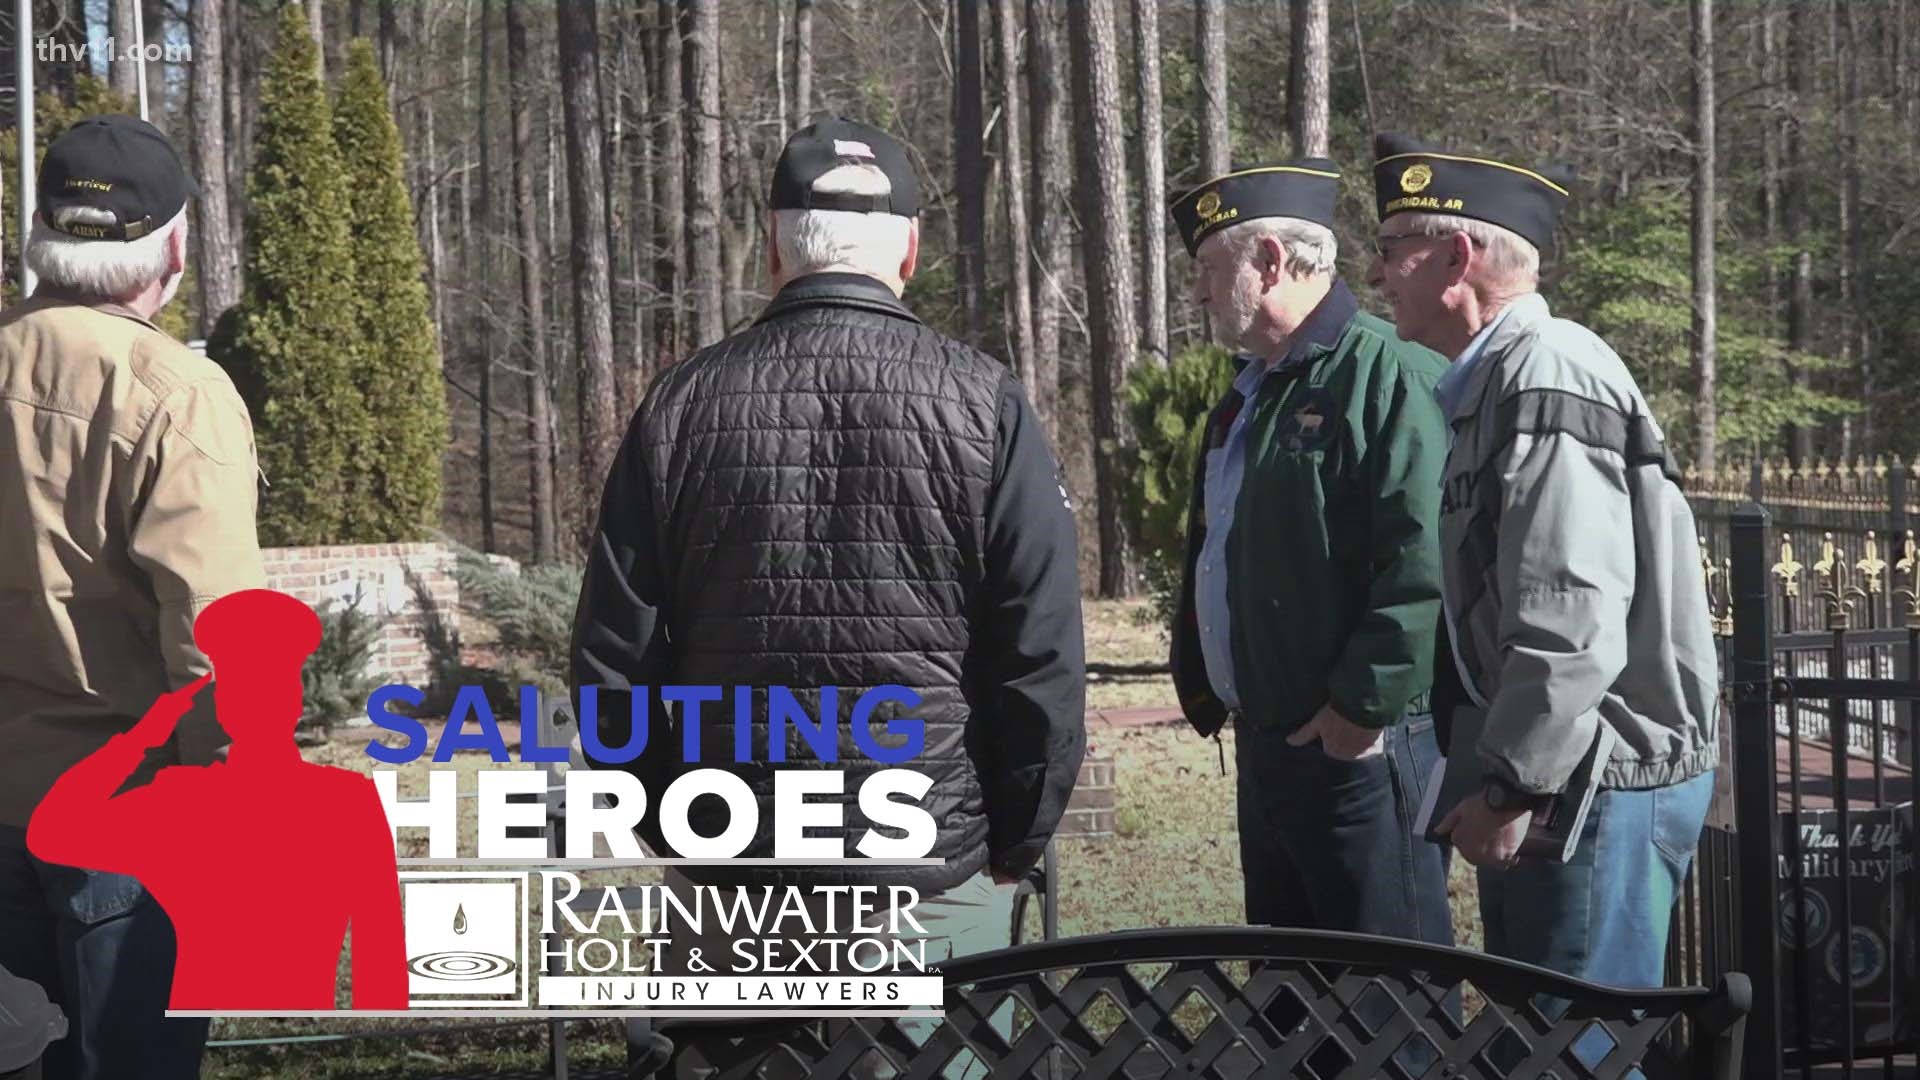 The 80th anniversary of a B-17 crash in Arkansas is soon, and we're saluting the heroes of the doomed flight and the men and women who are maintaining a memorial.